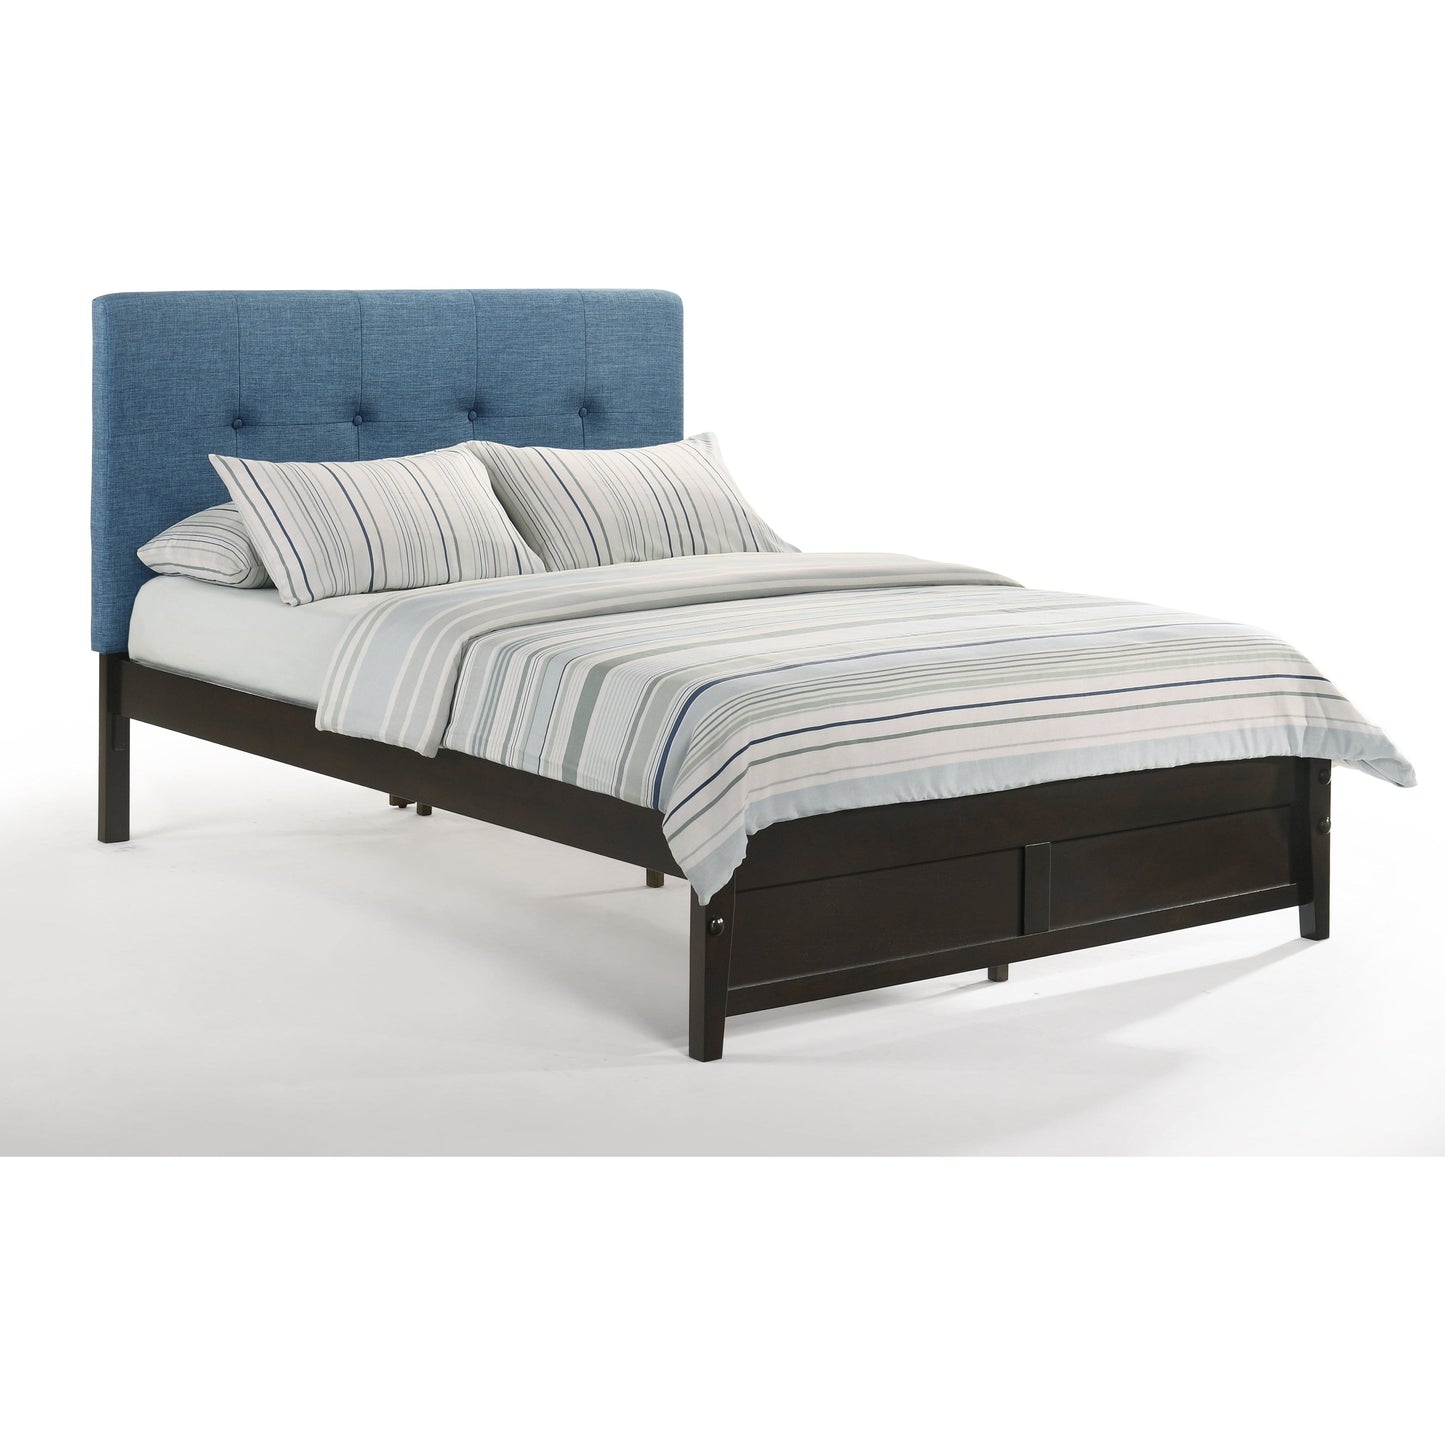 Night and Day Paprika Full Bed in Charcoal with Chocolate Finish Frame (K Series) Teal PAP-KH-FUL-CC-TL-COM